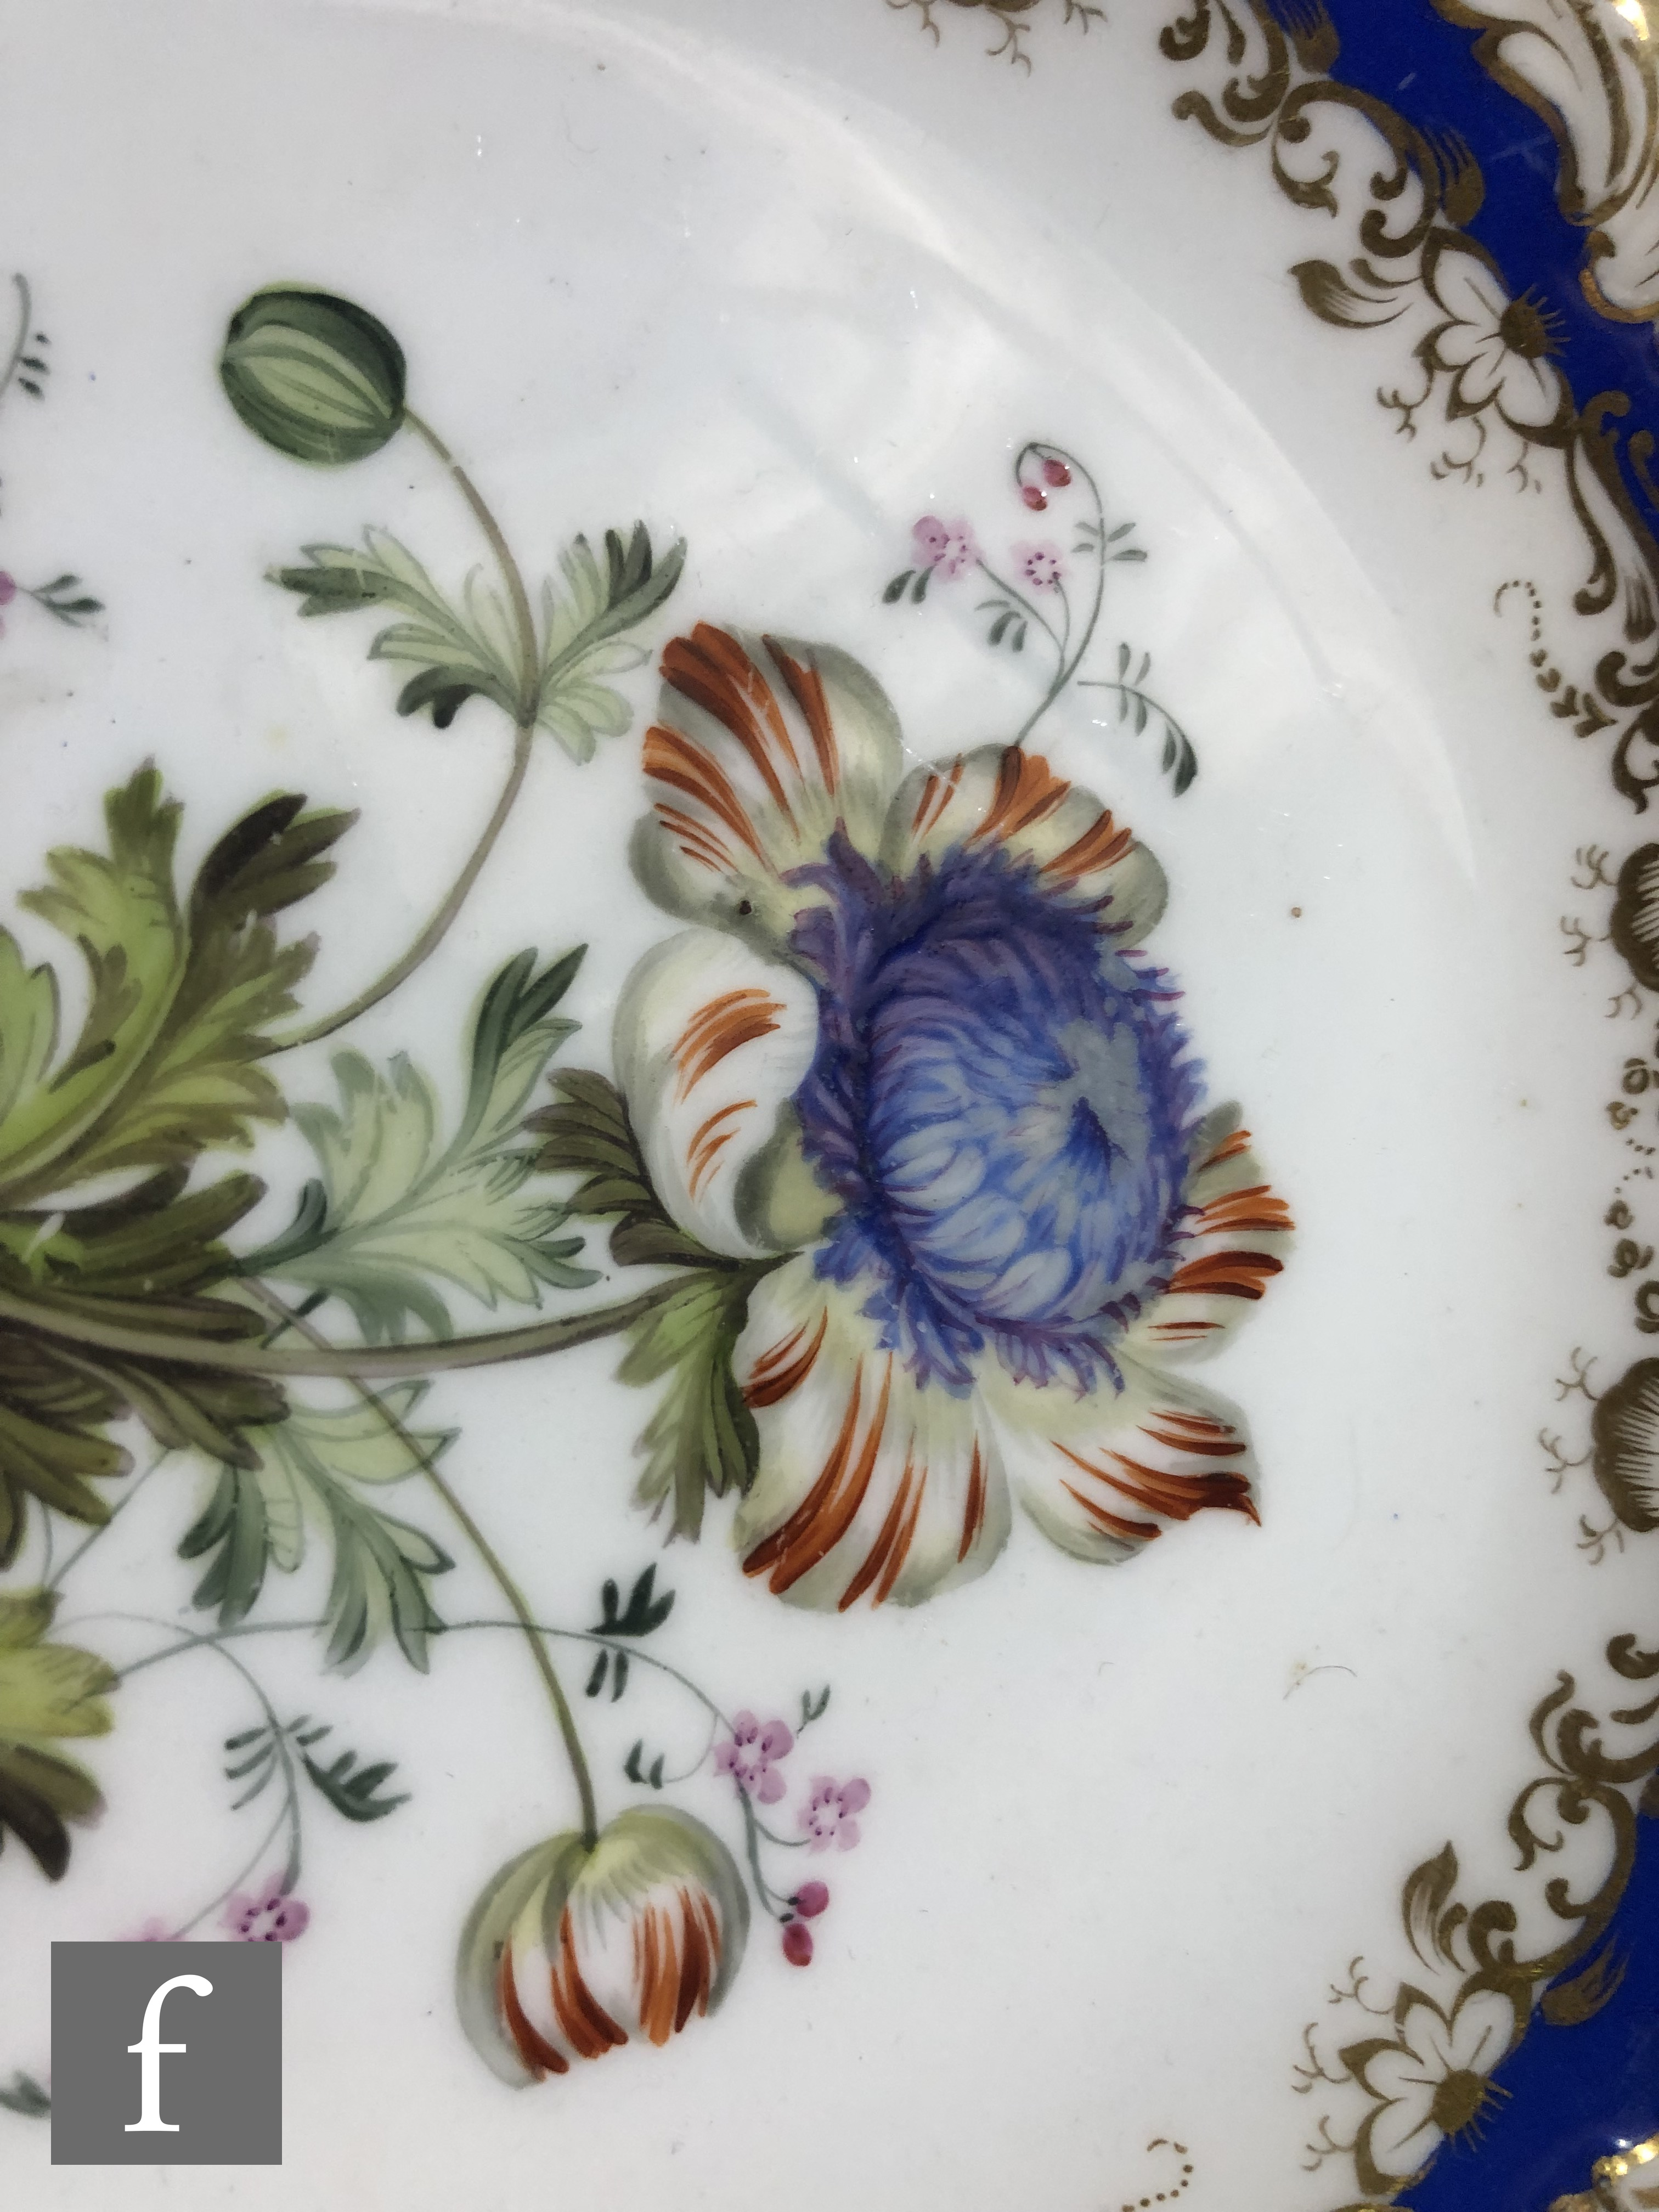 Two 19th Century dessert plate dishes, possibly Spode, both decorated with hand painted botanical - Image 4 of 6